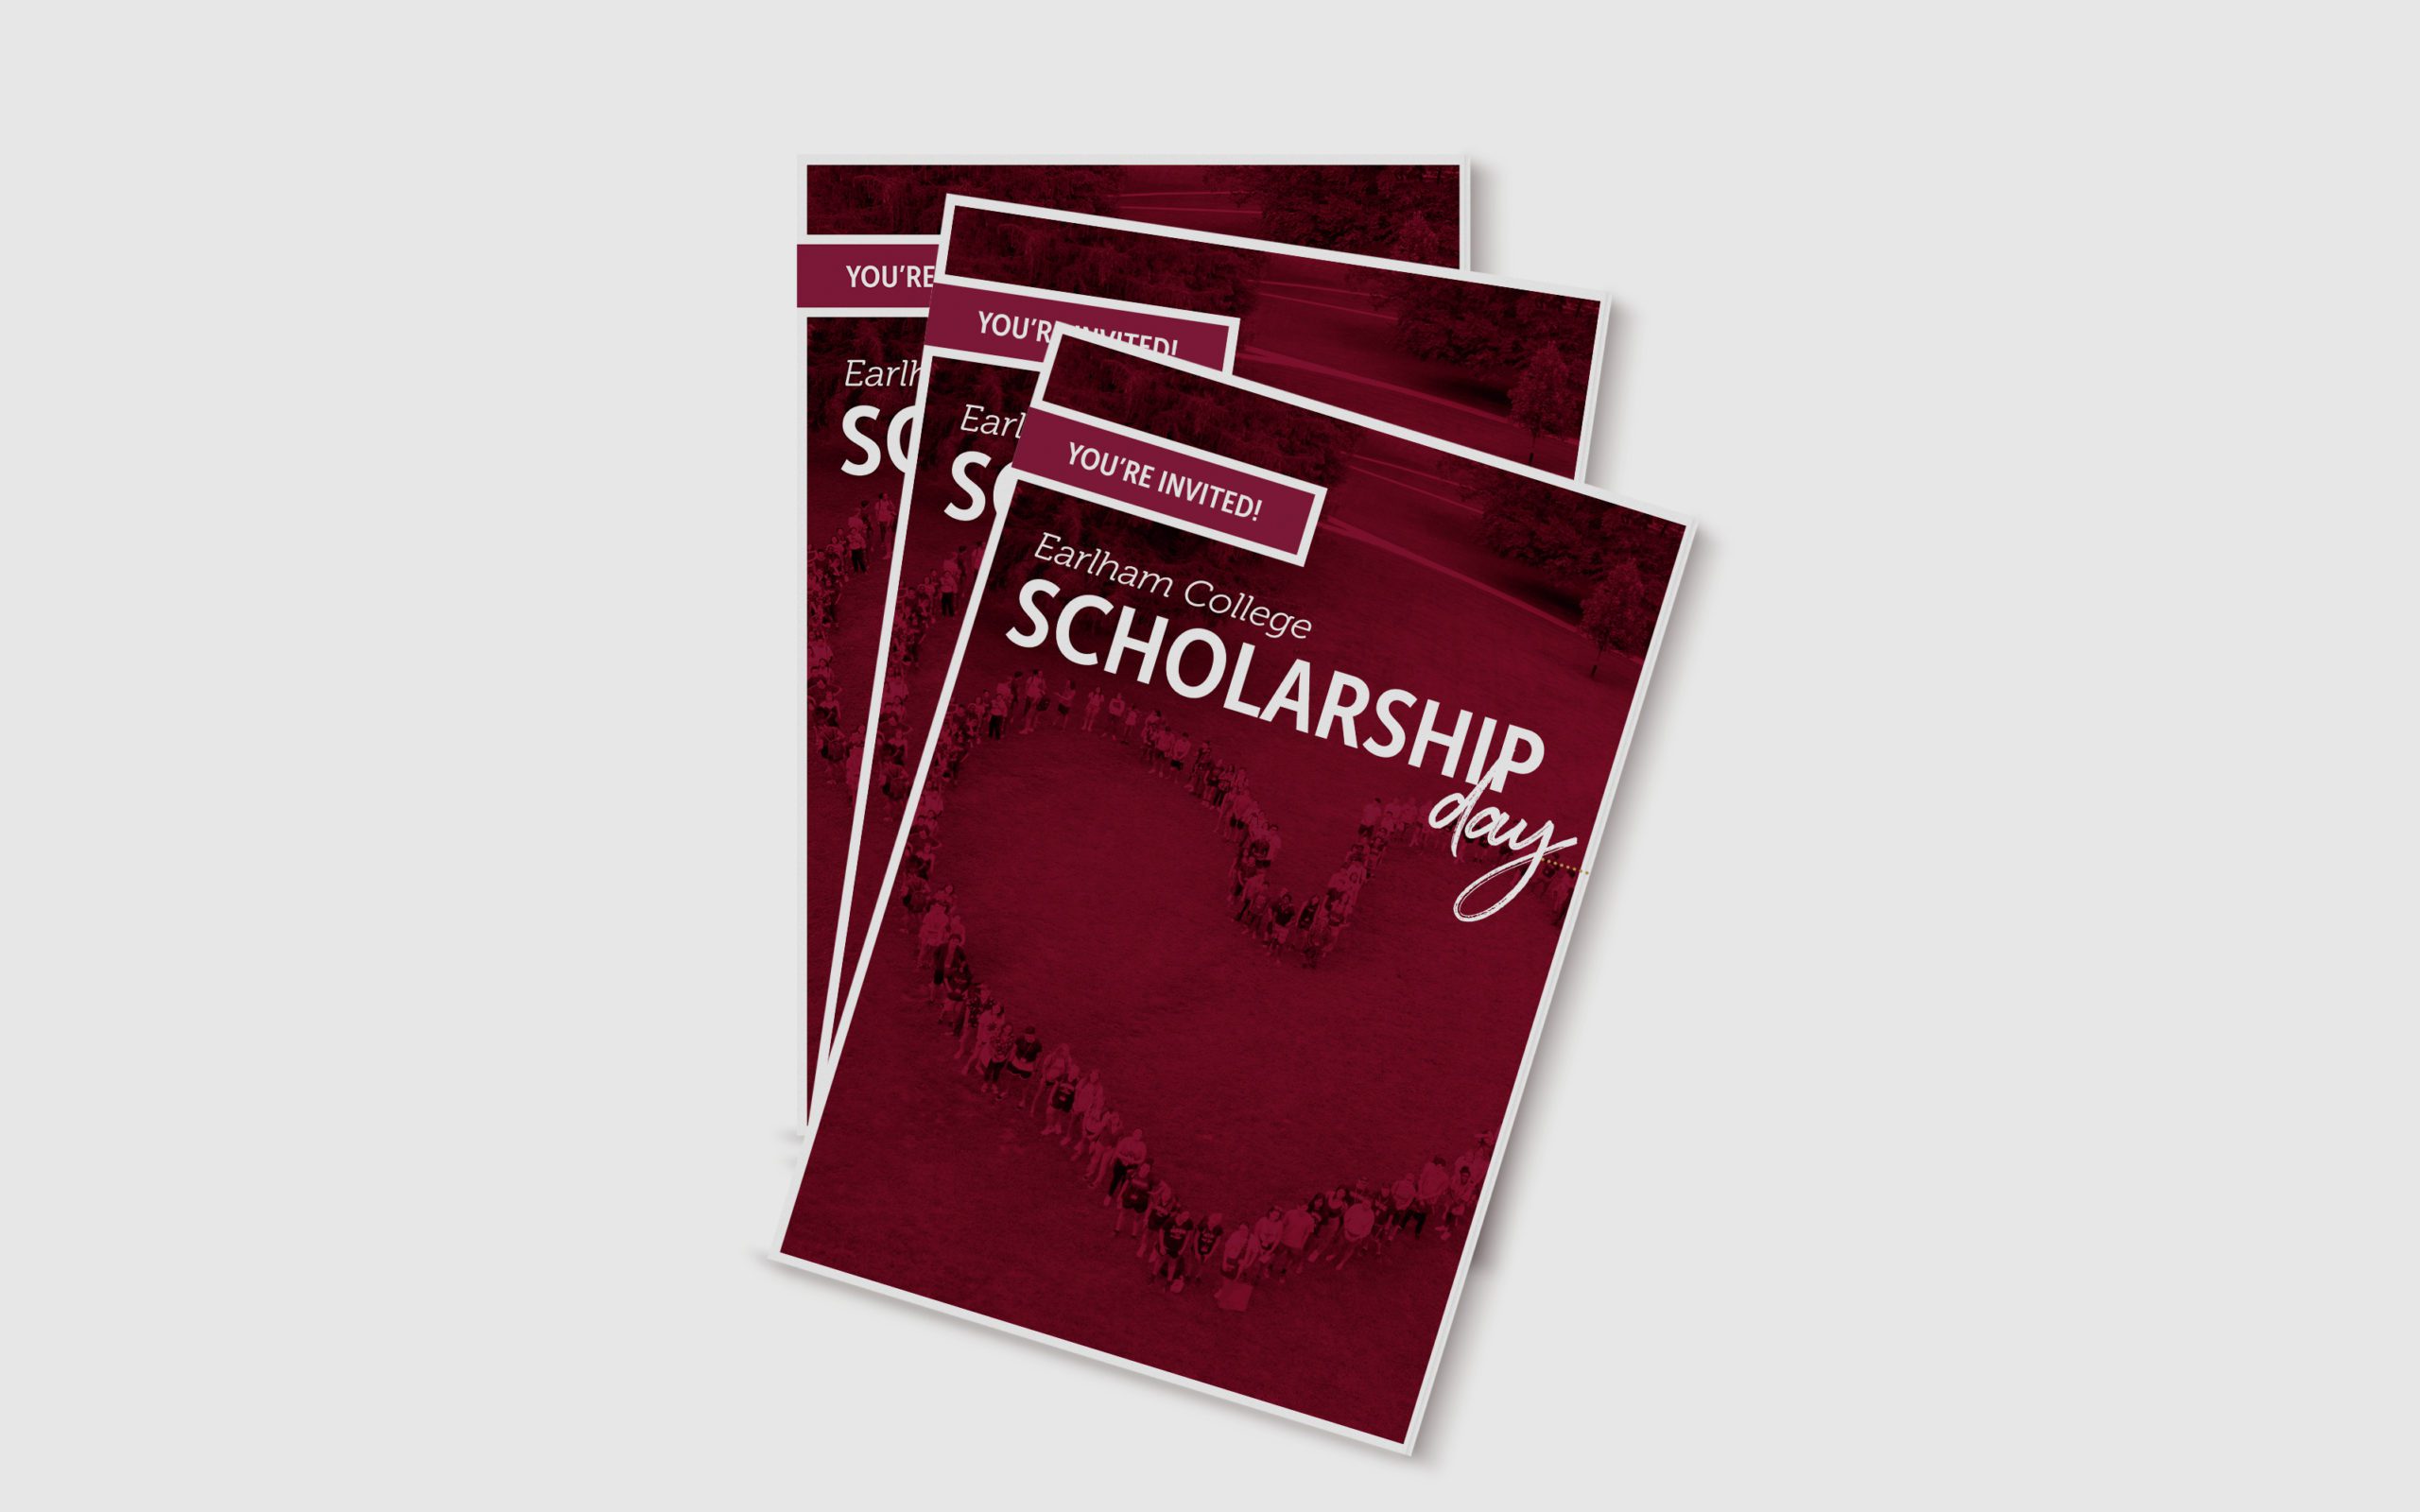 Example scholarship day flyer